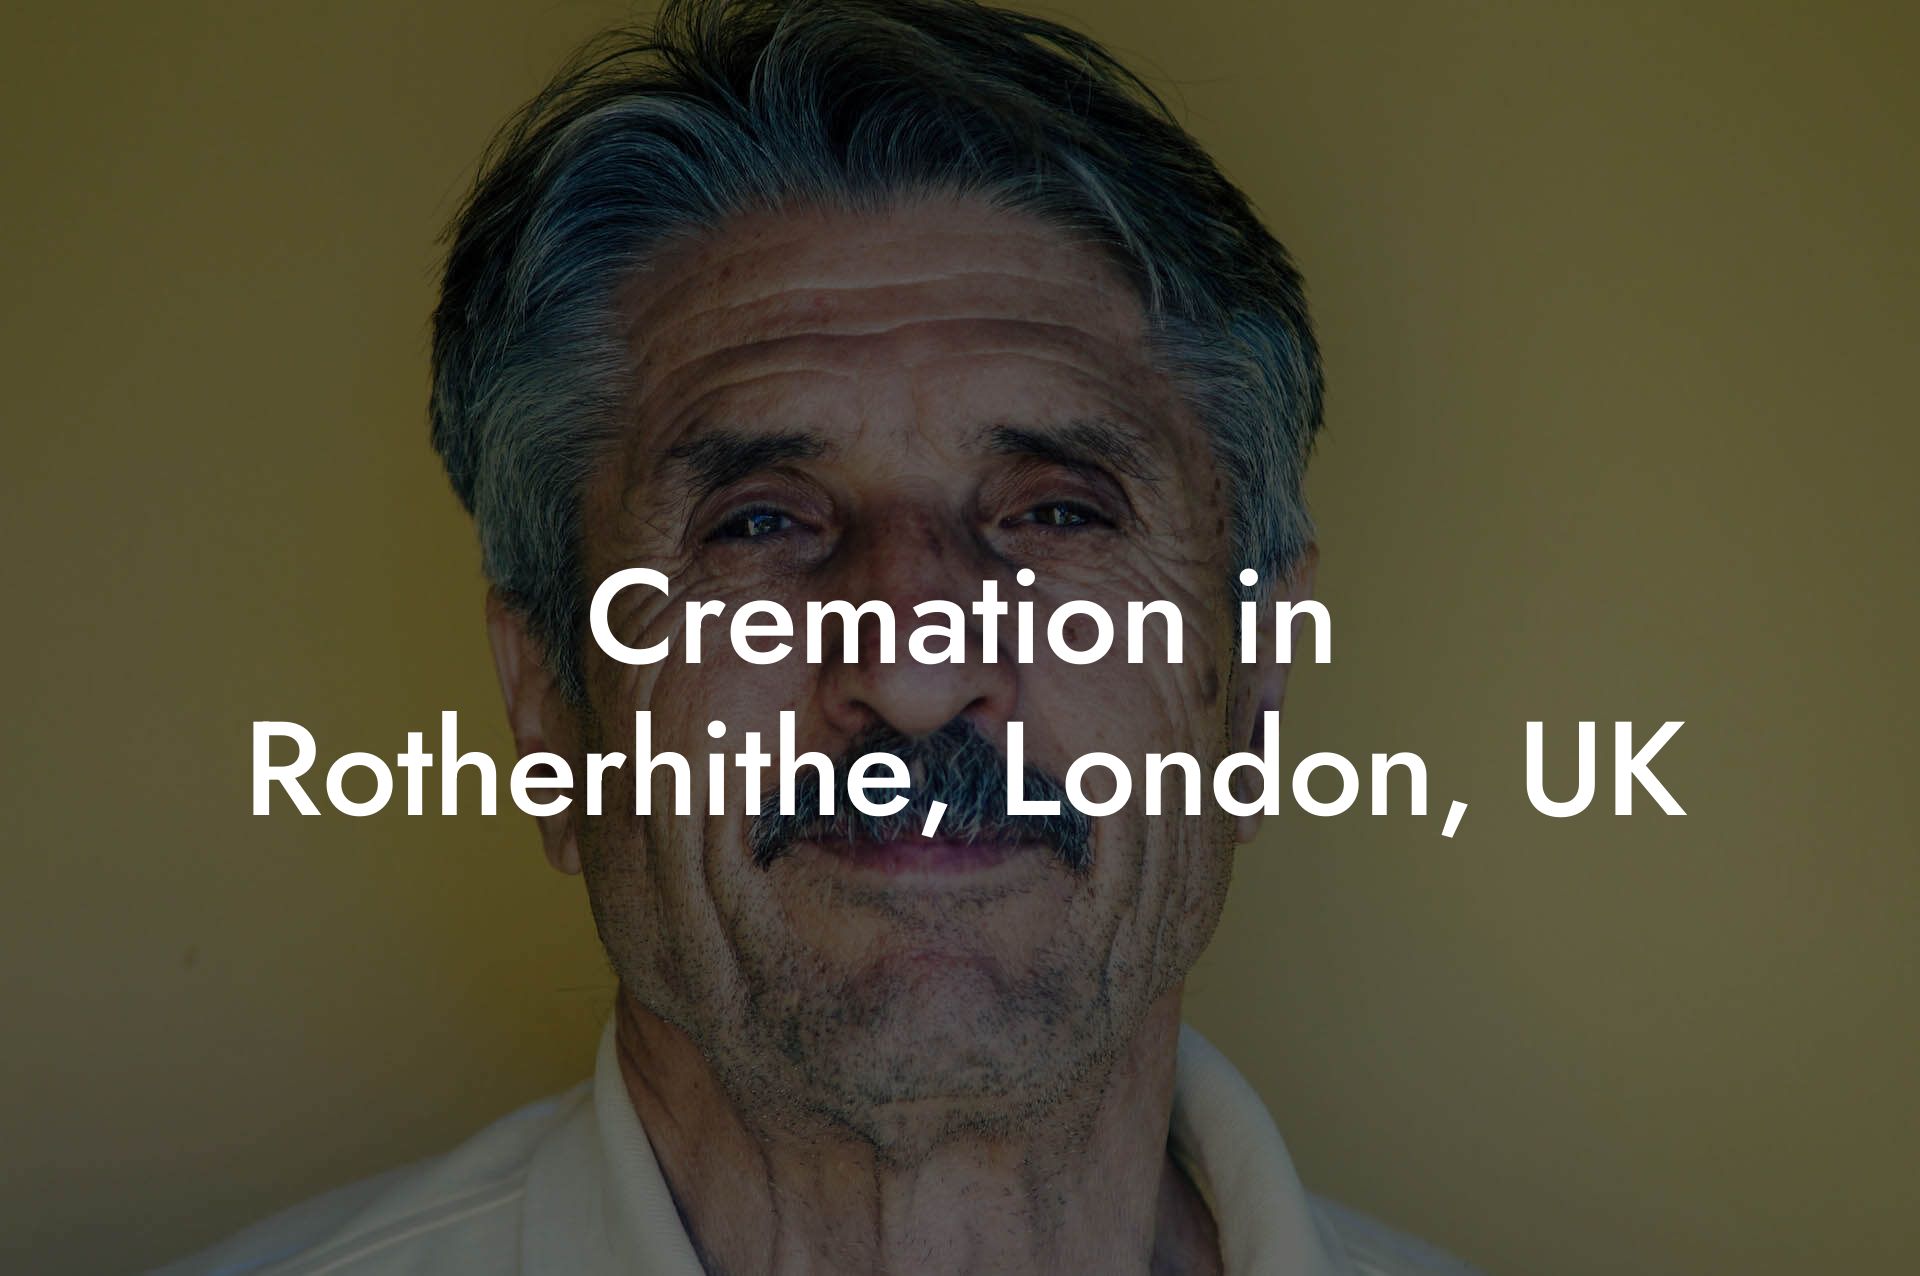 Cremation in Rotherhithe, London, UK